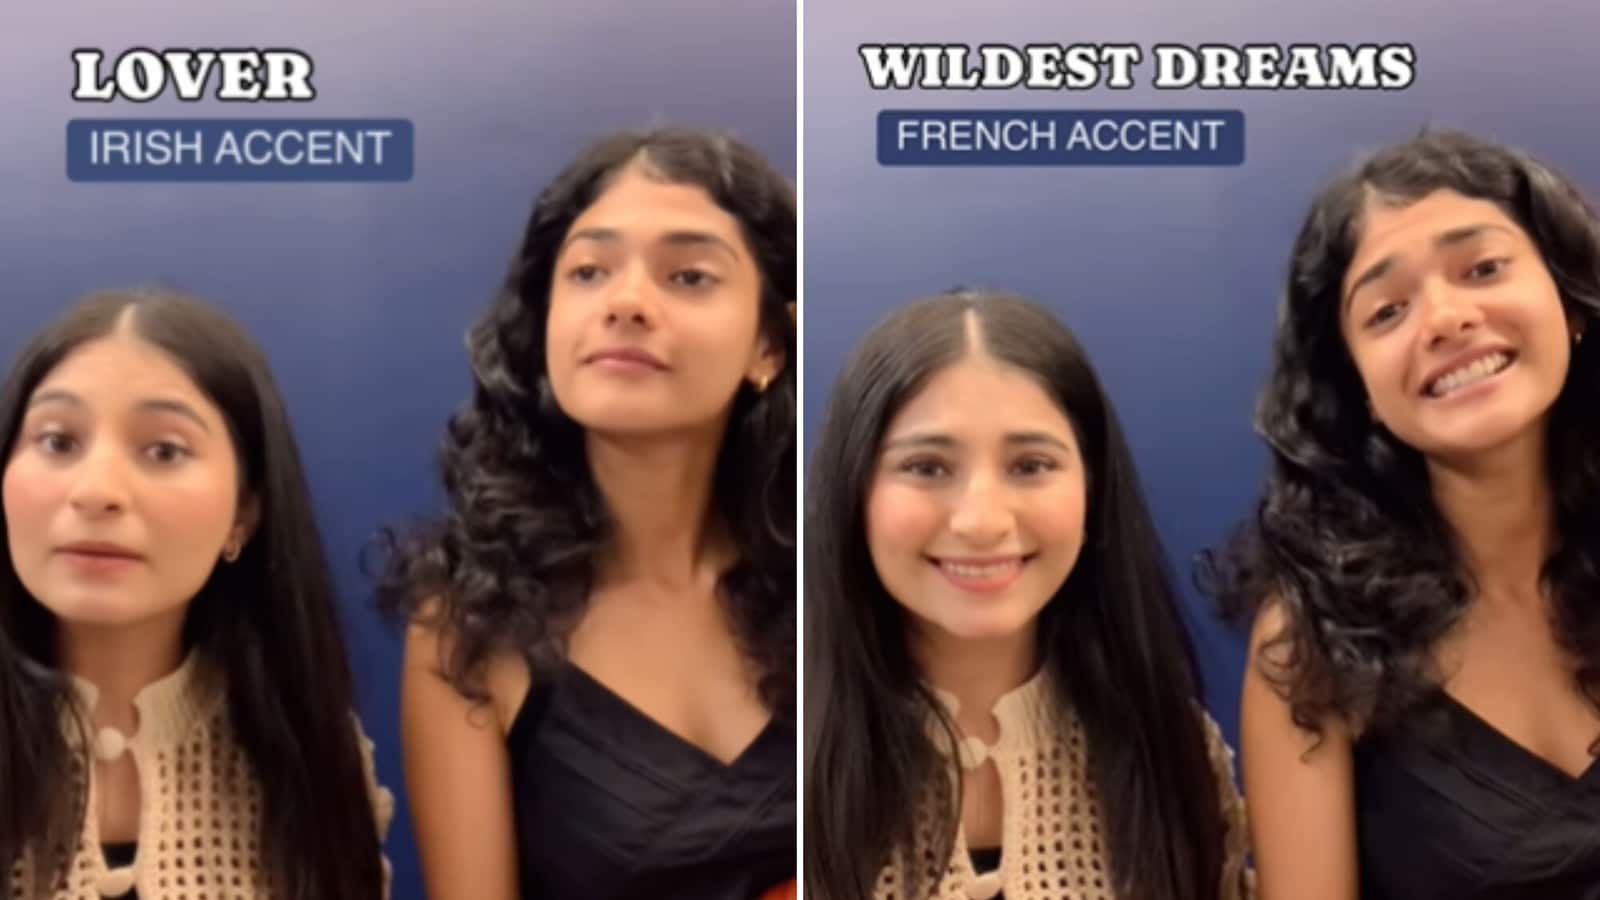 Musicians sing Taylor Swift songs in 5 different accents, receive mixed reactions